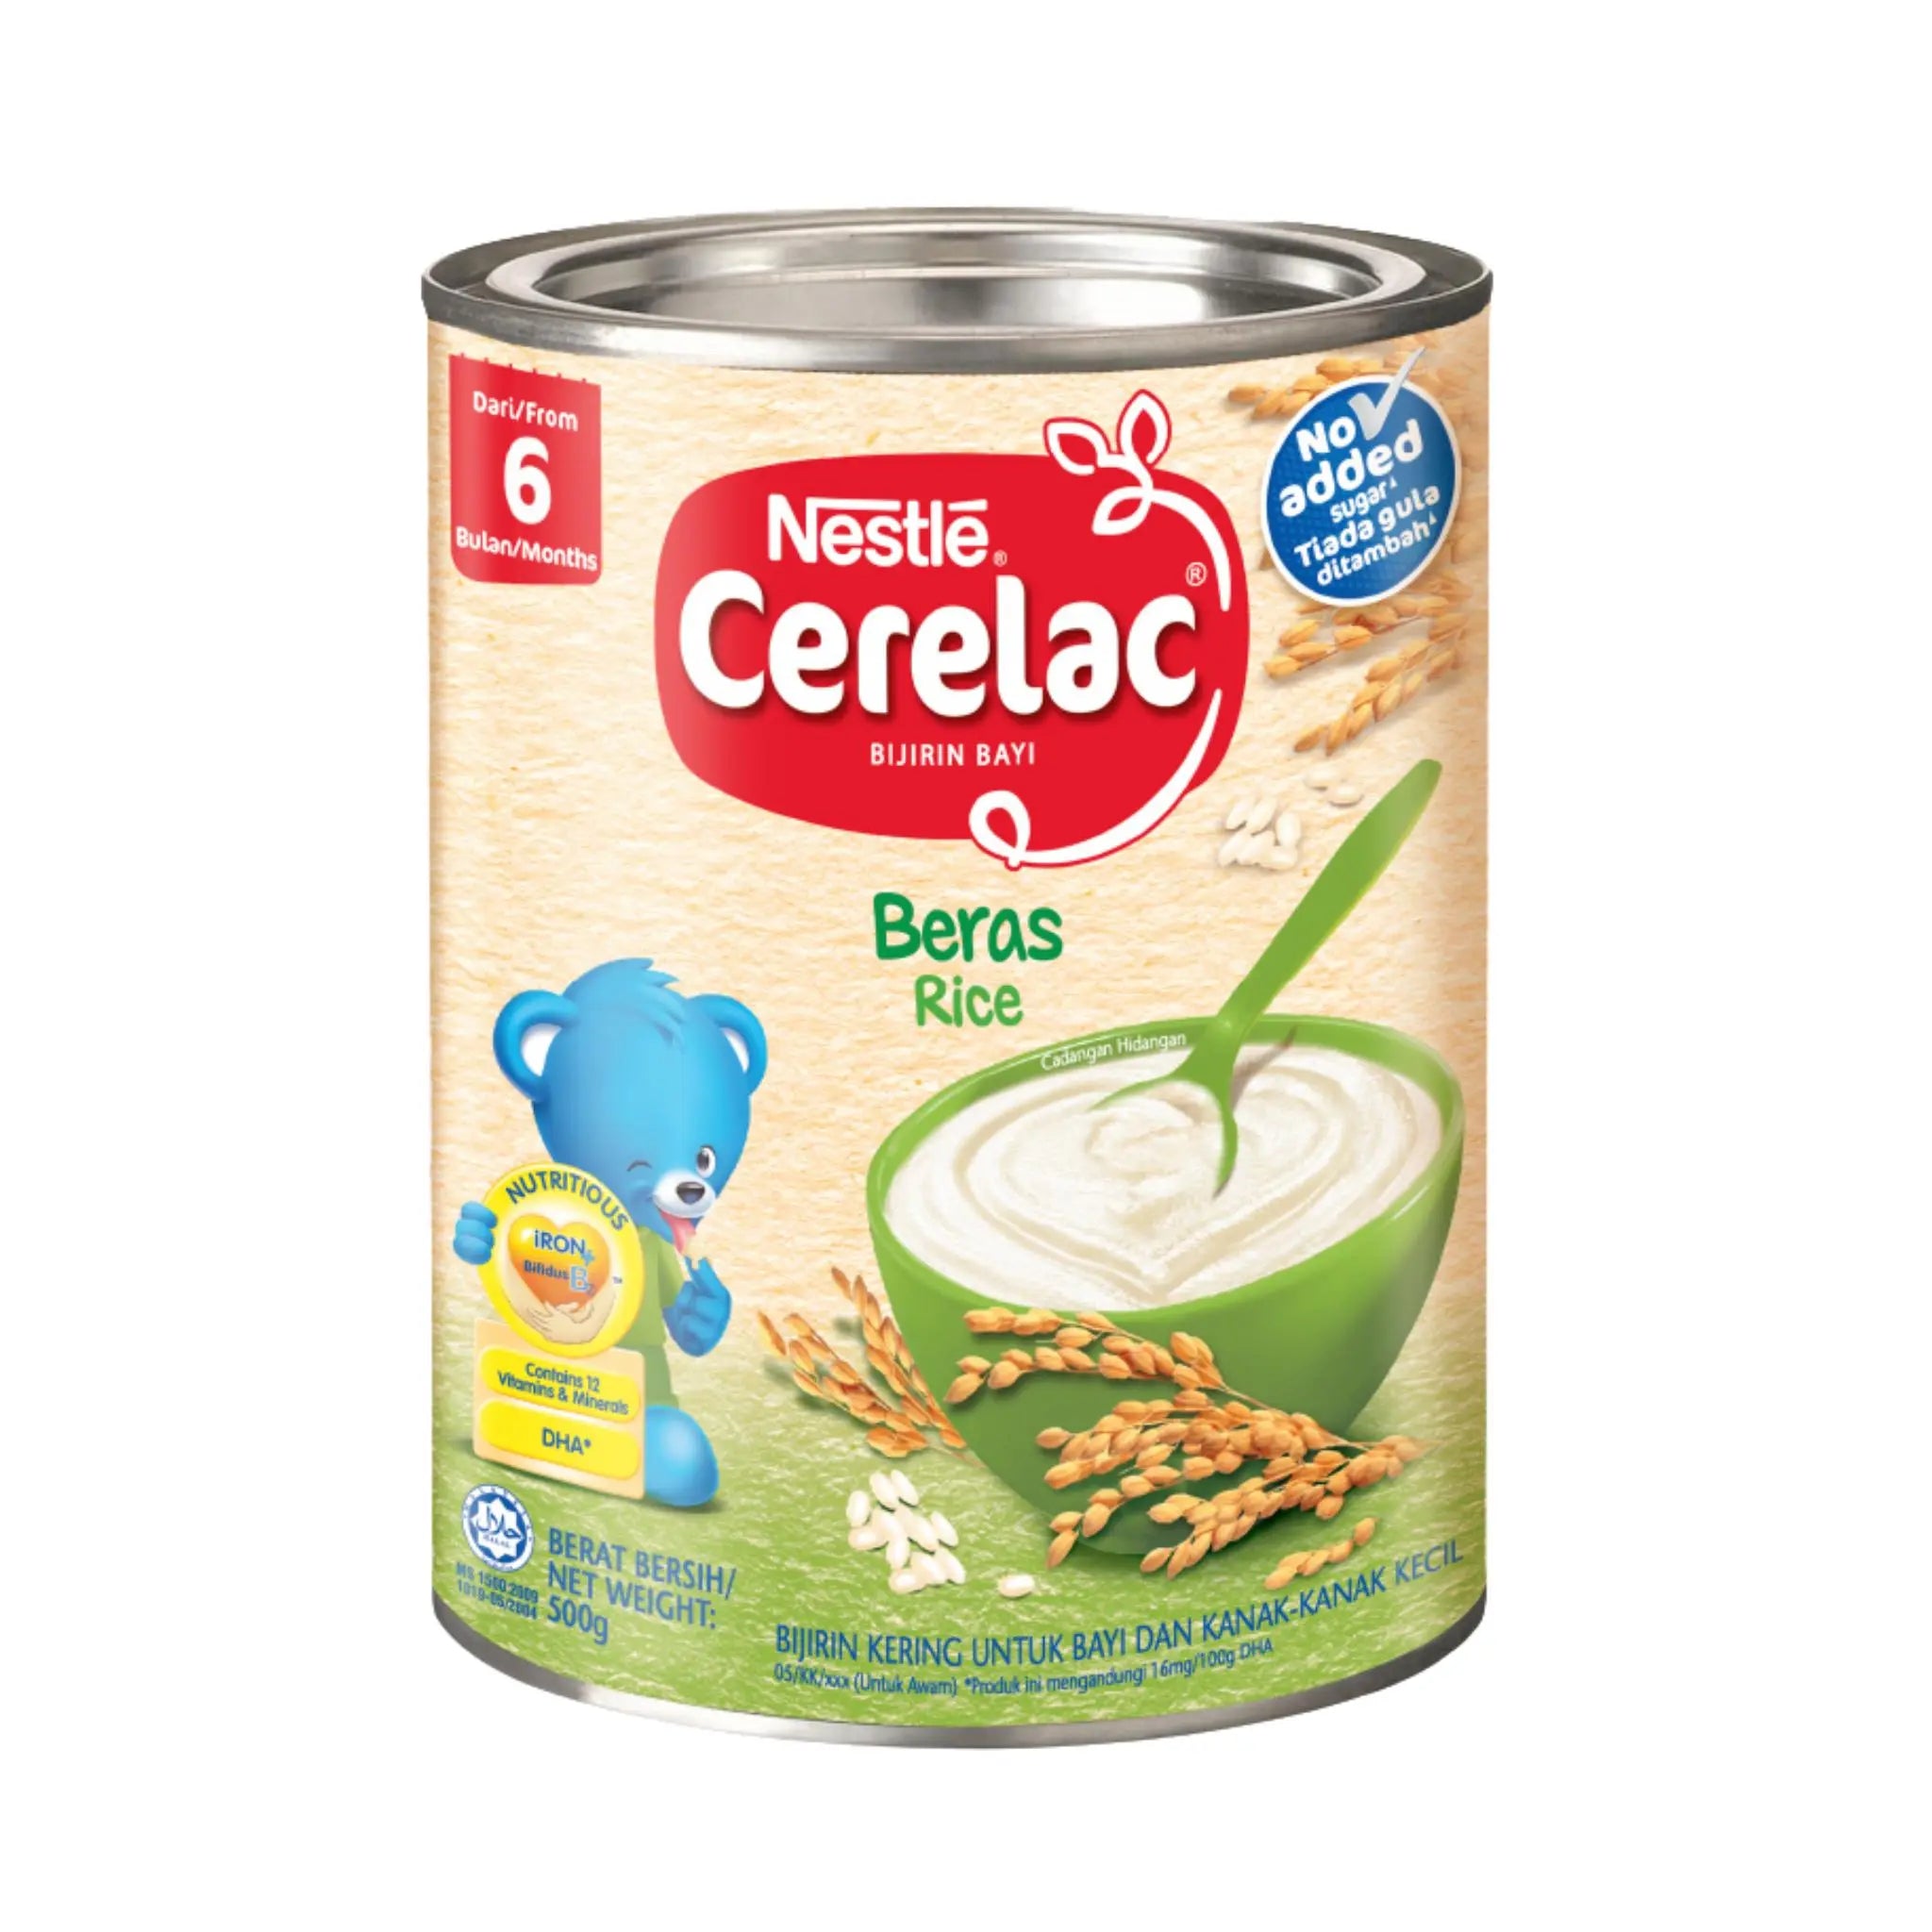 Nestle Cerelac Rice (from 6 Months) - 12x500g (1 carton) - Marino.AE